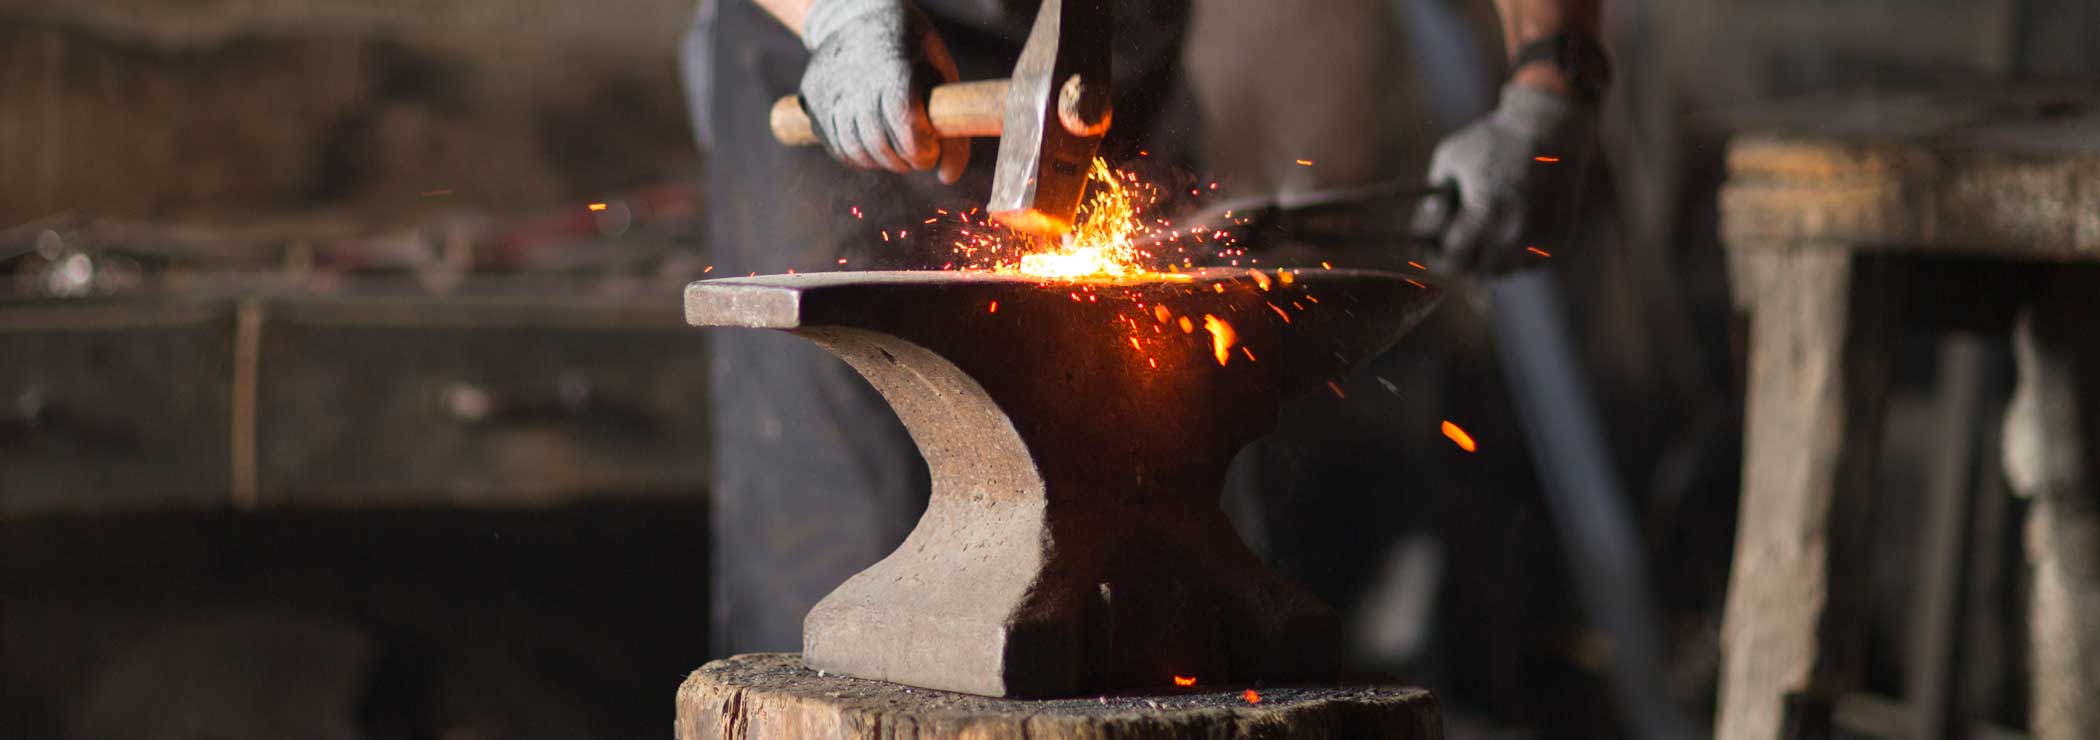 Blacksmith forges a hot workpiece on the anvil